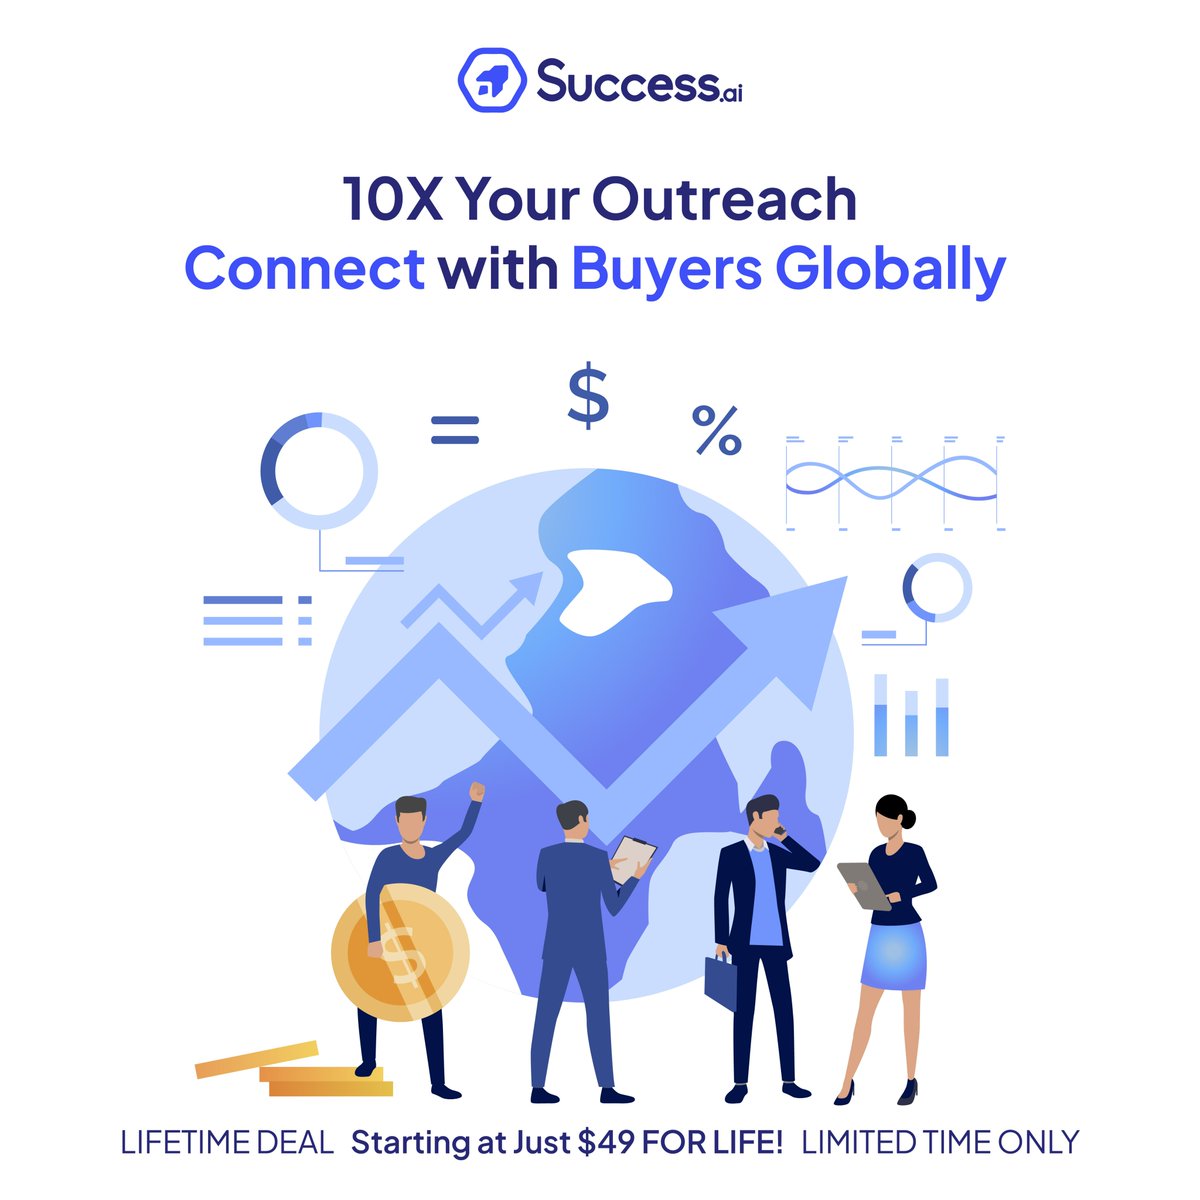 With Success.ai say goodbye to missed opportunities and hello to boundless connections, all while keeping your budget intact.

Gab LIFETIME Deal:
appsumo.com/products/succe… 

#SuccessAI #BoundlessOutreach #GlobalBuyers #CostEffectiveCampaigns #PersonalizedEngagement